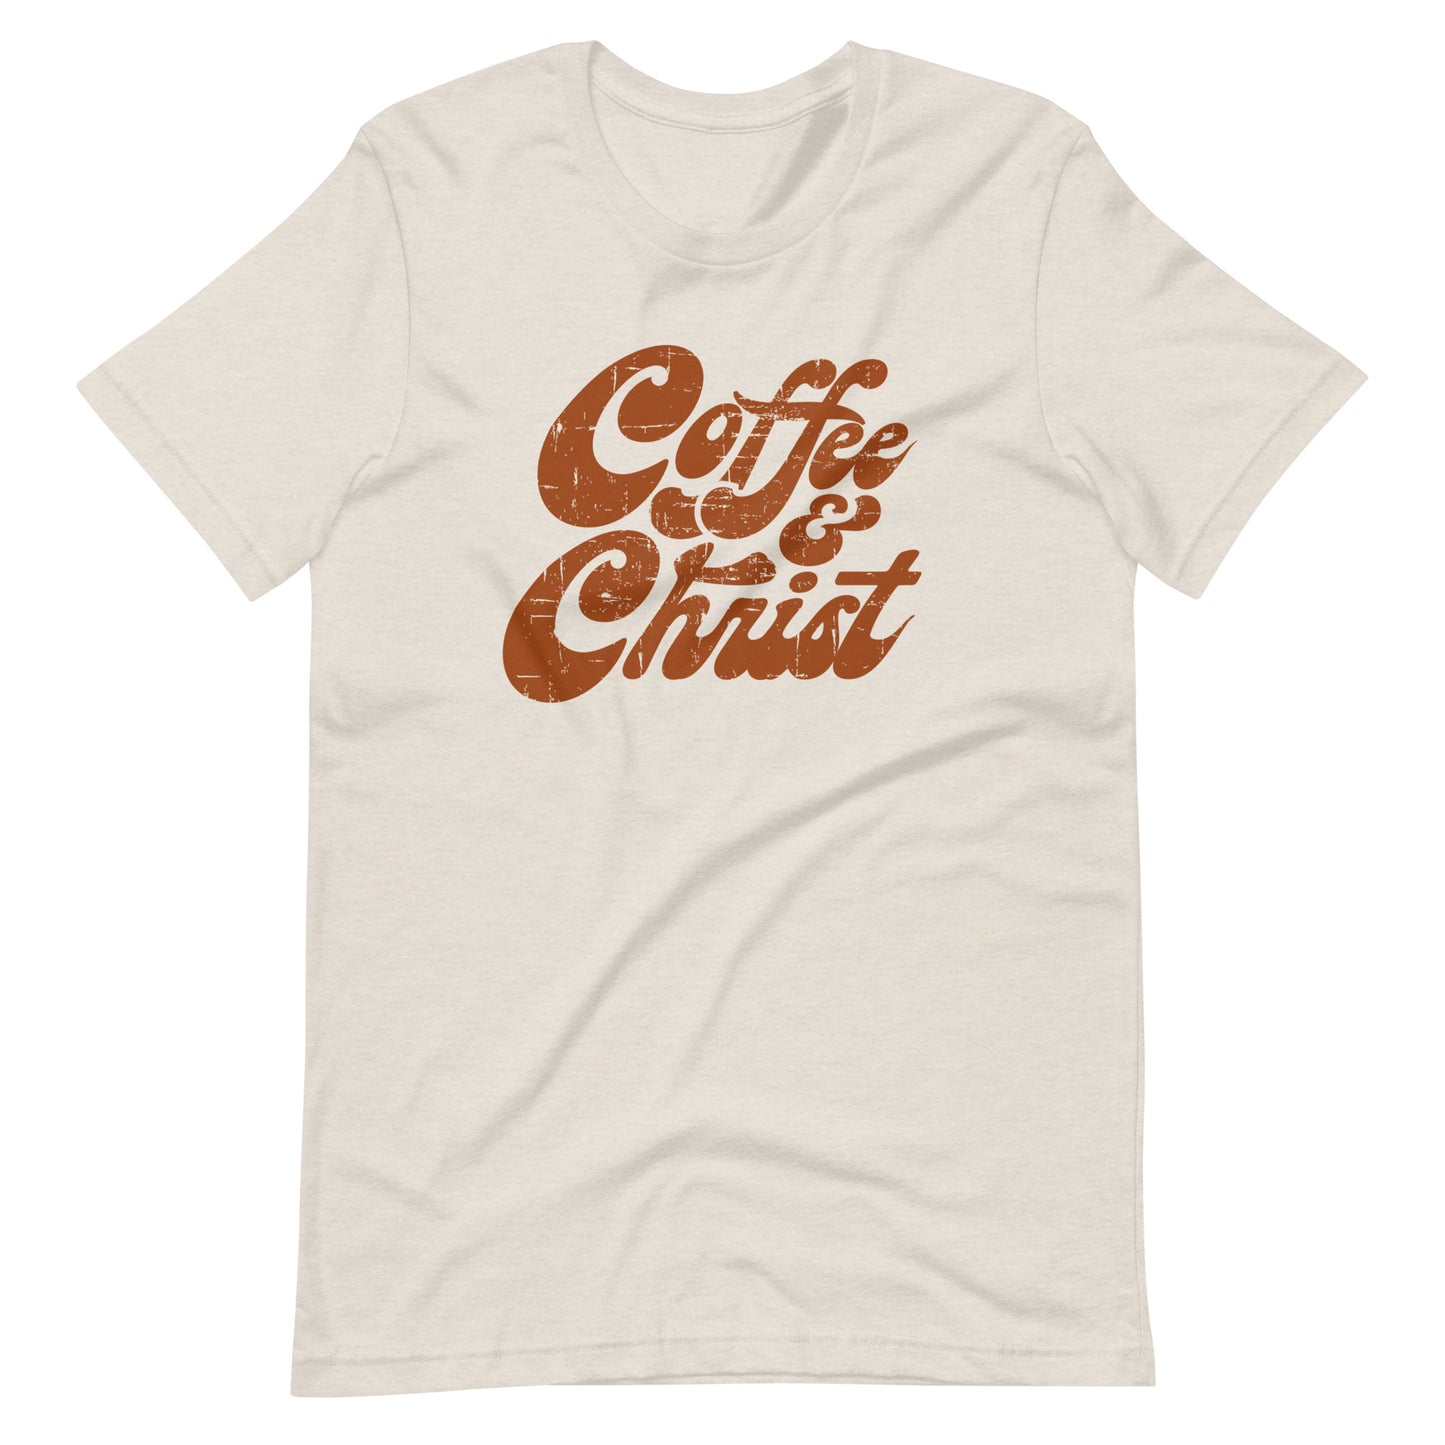 Coffee and Christ Bella Canvas 3001 T-Shirt